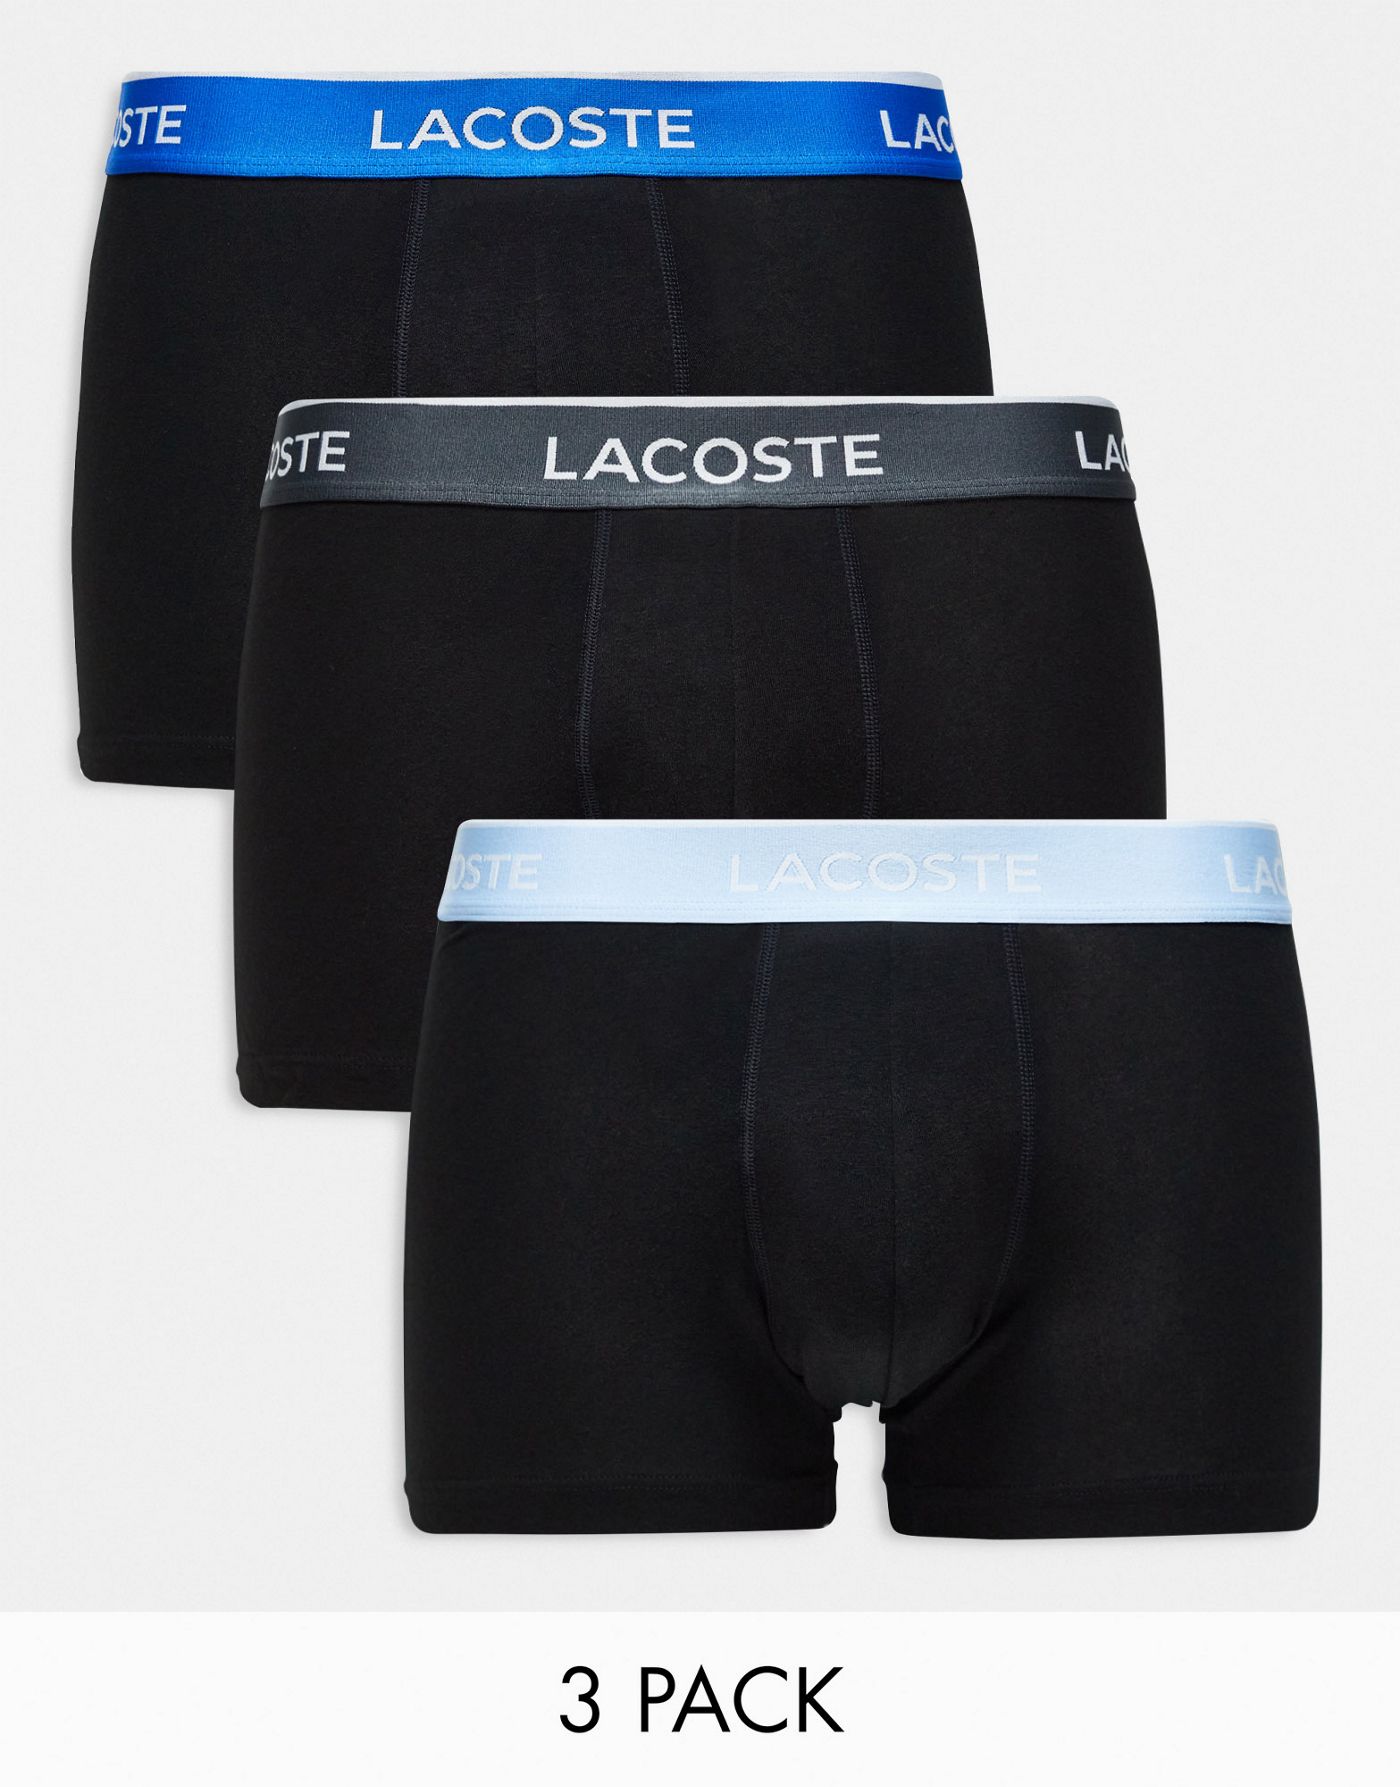 Lacoste essentials 3 pack trunks in black with contrast waistband